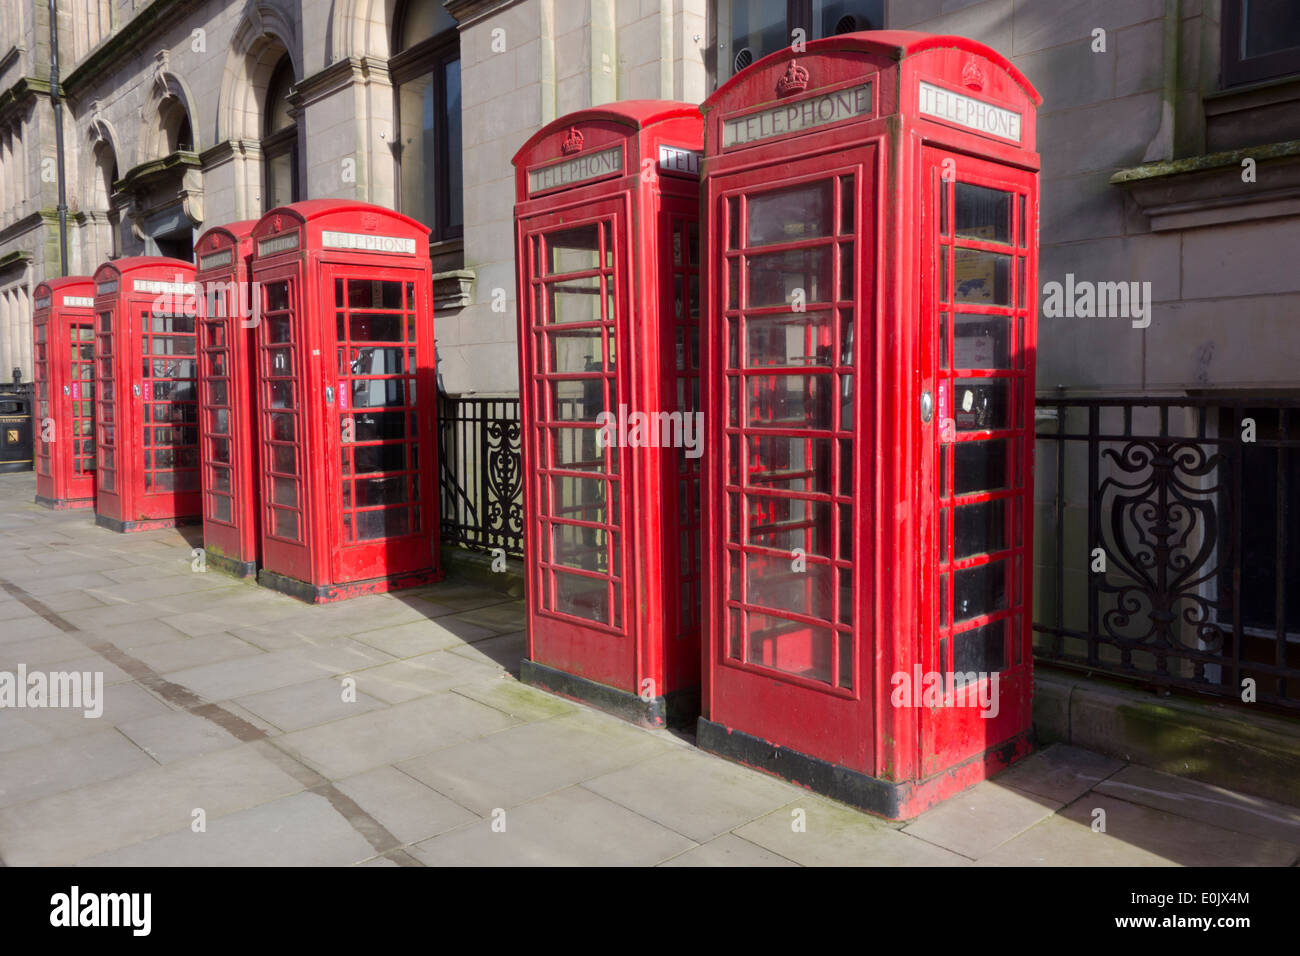 A row of 6 classic red British Telecom telephone boxes Stock Photo